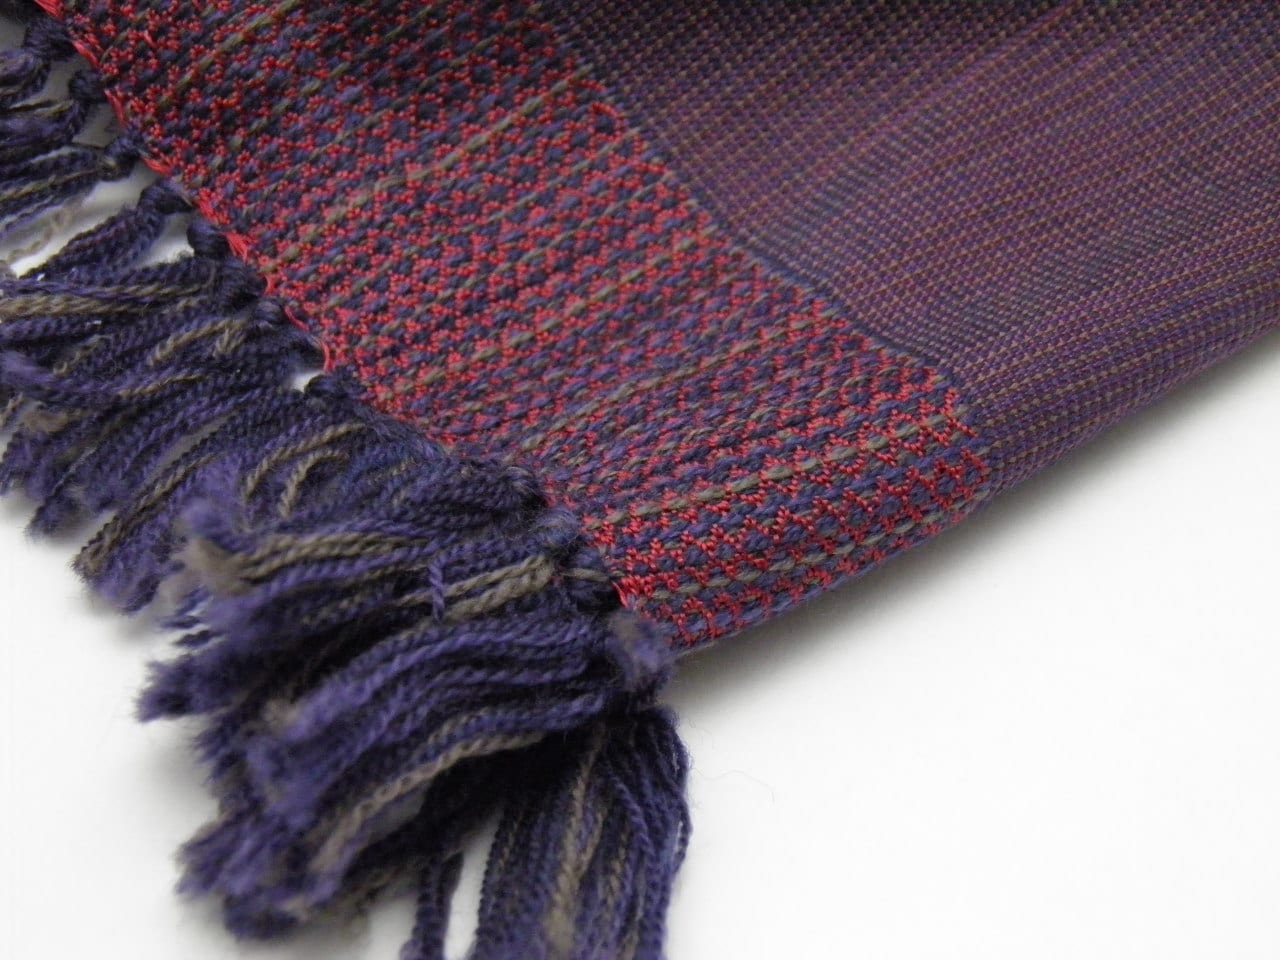 Men's Wool and Silk Scarf | Ethic & chic